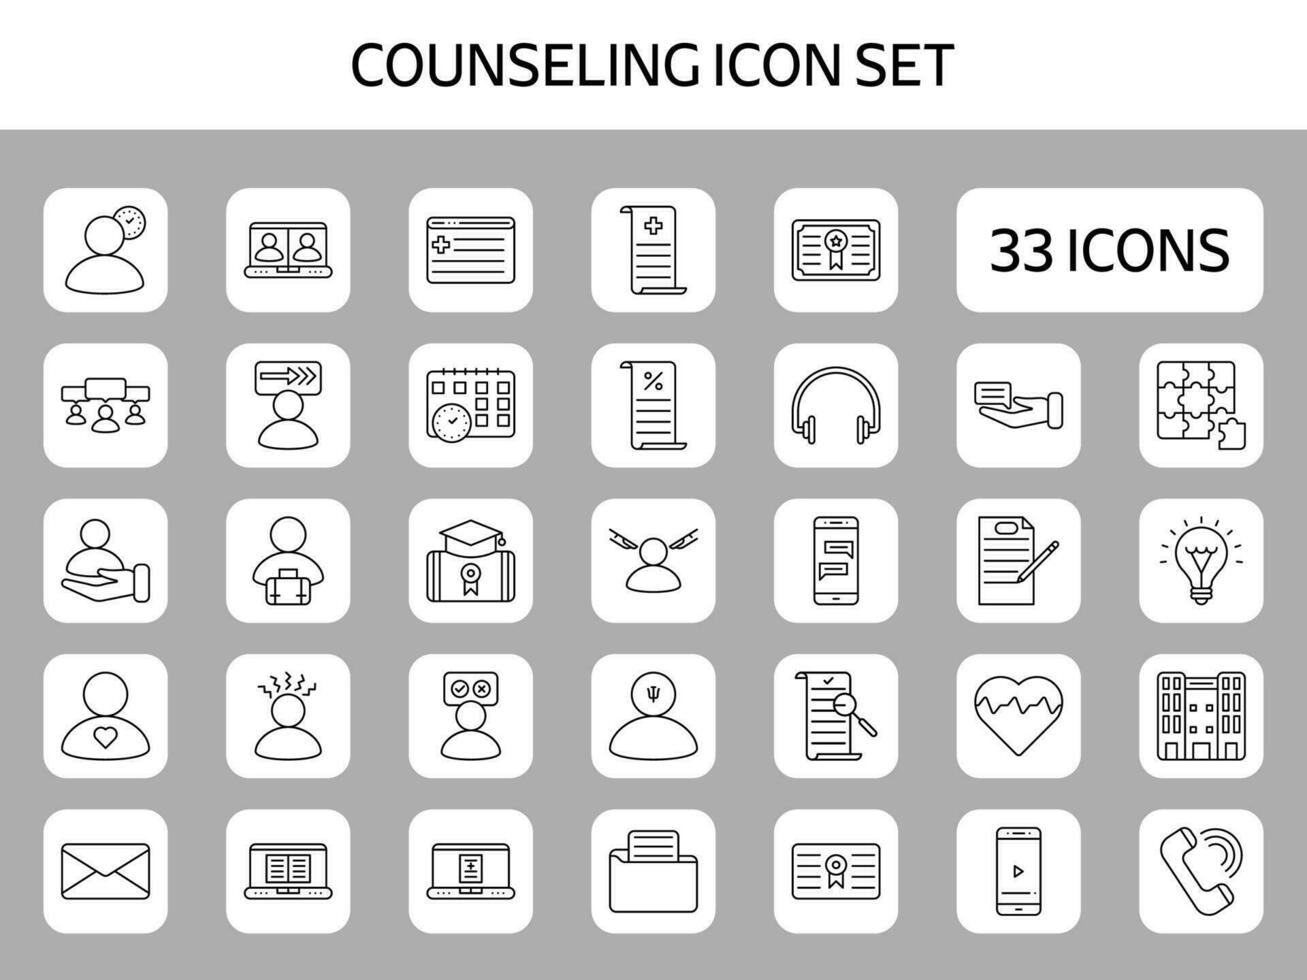 Black Line Art Counseling Icons On Grey Square Background. vector